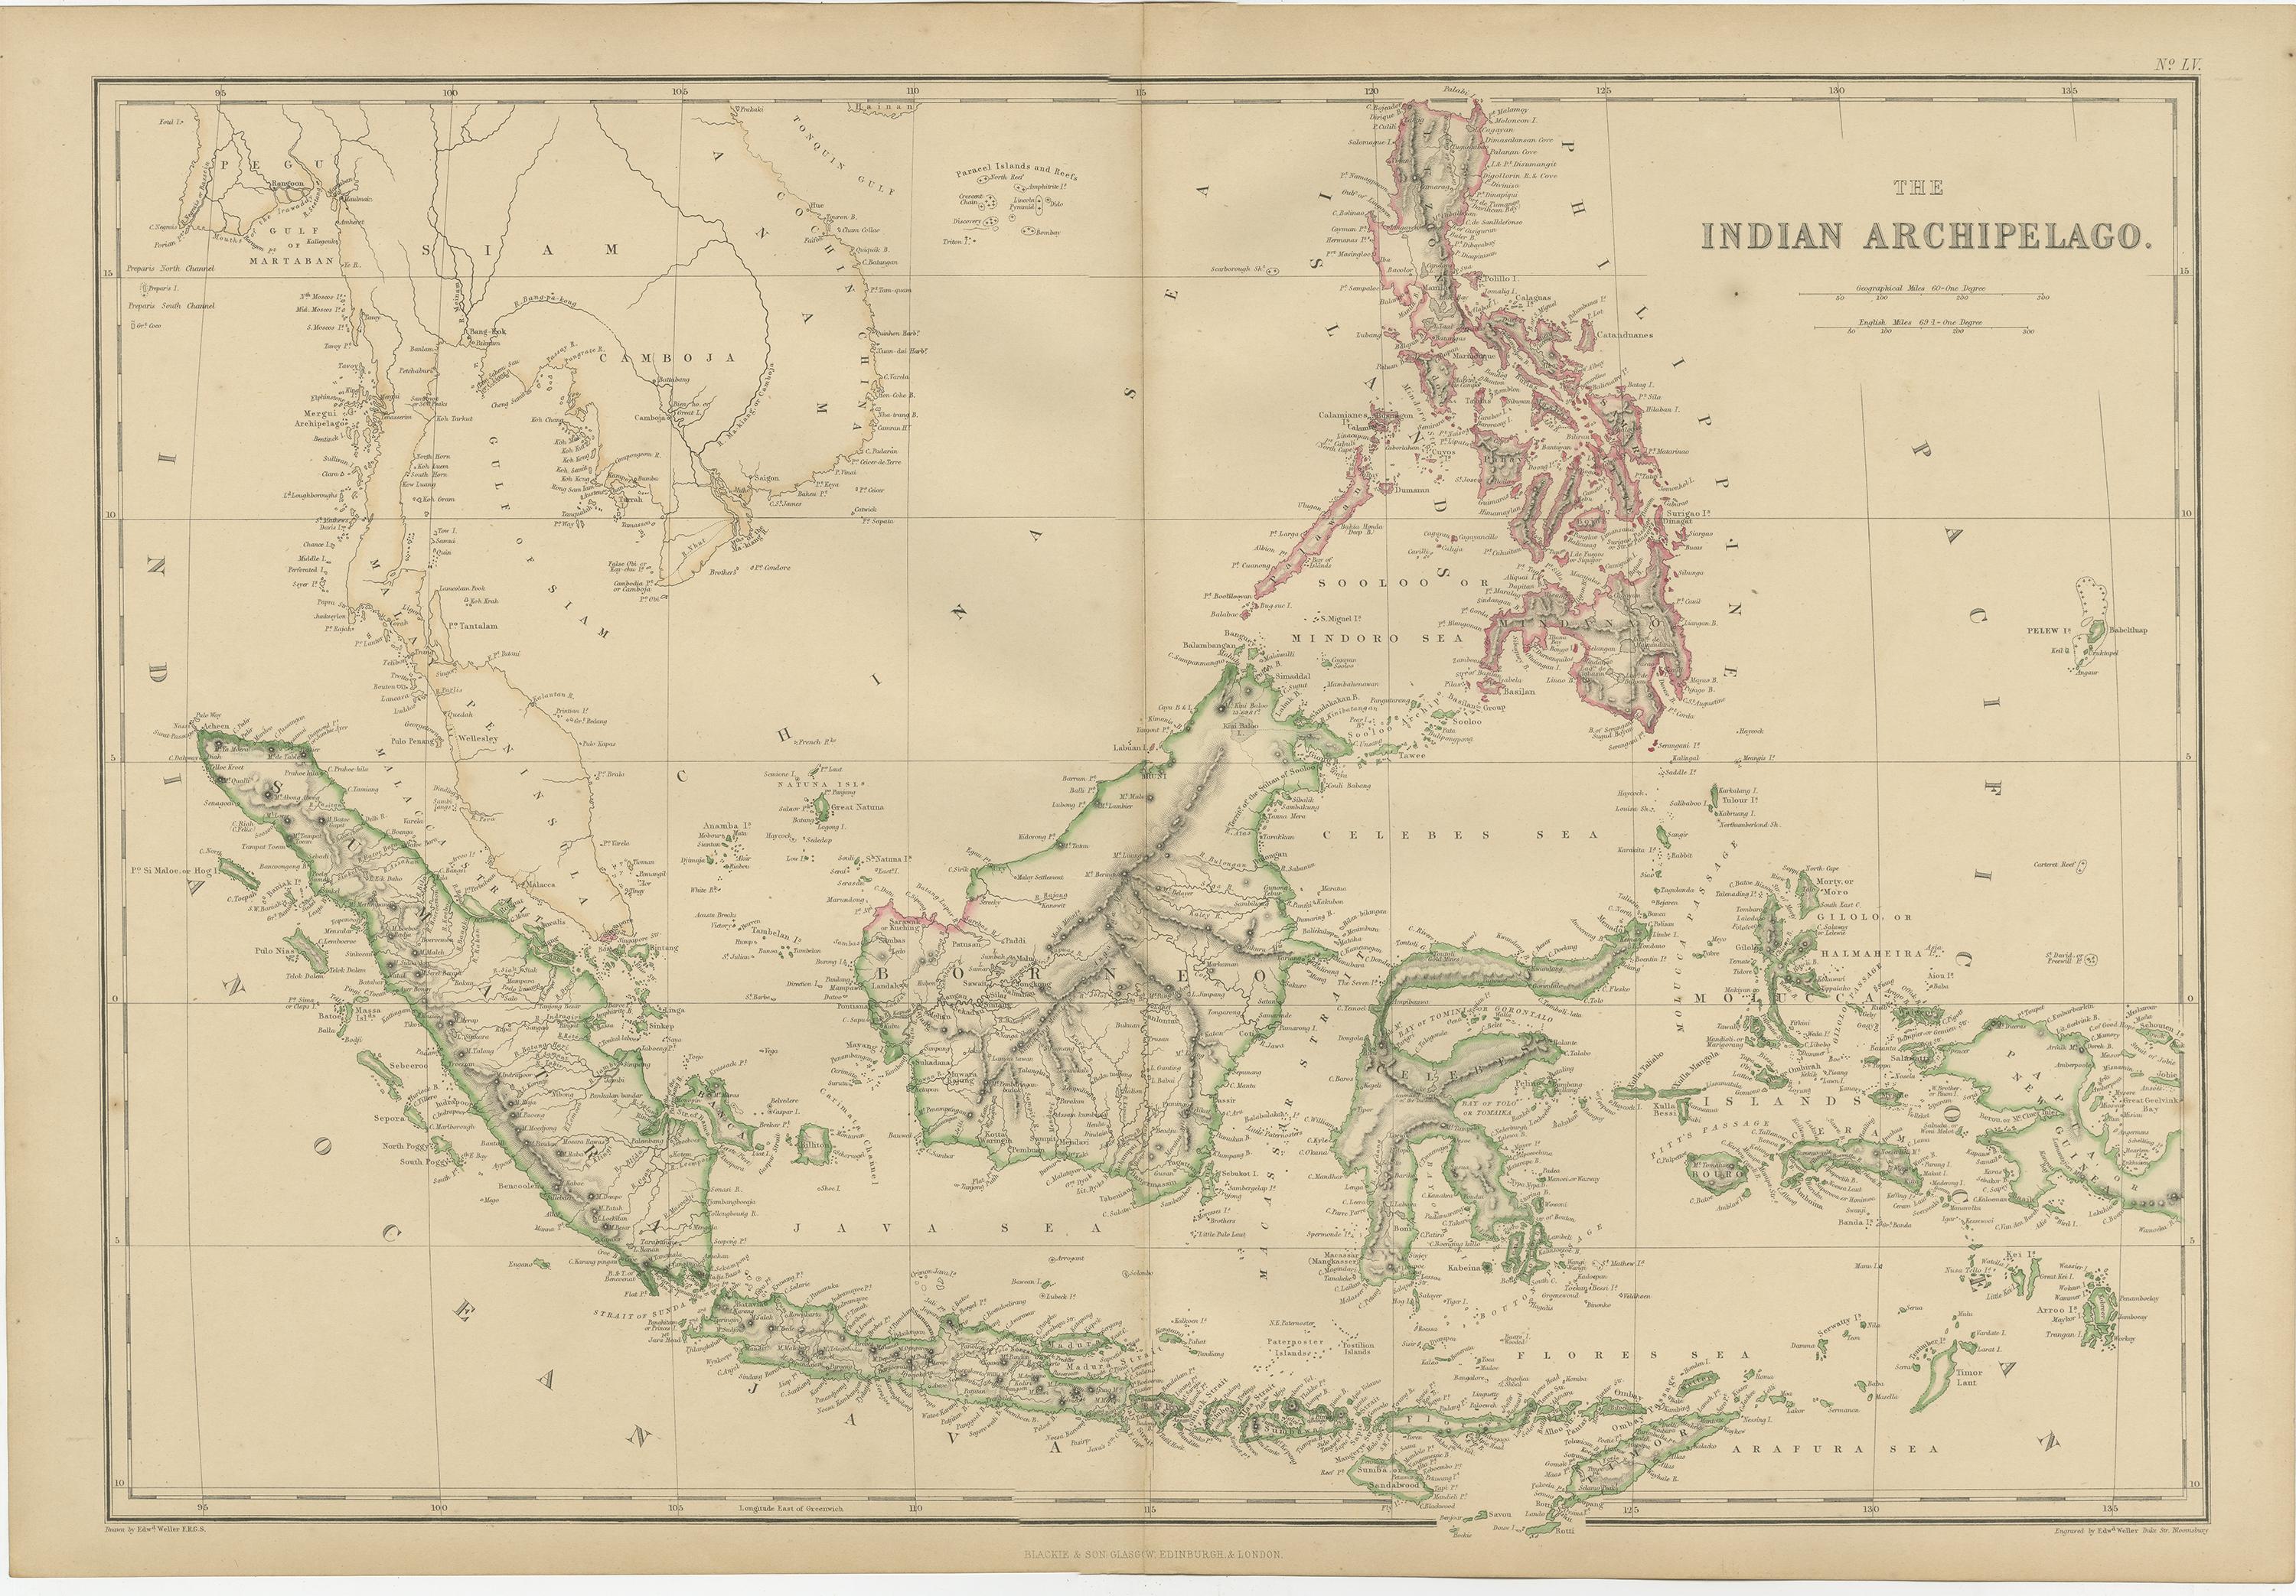 Antique map titled 'The Indian Archipelago'. Original antique map of the East Indies. This map originates from ‘The Imperial Atlas of Modern Geography’. Published by W. G. Blackie, 1859.